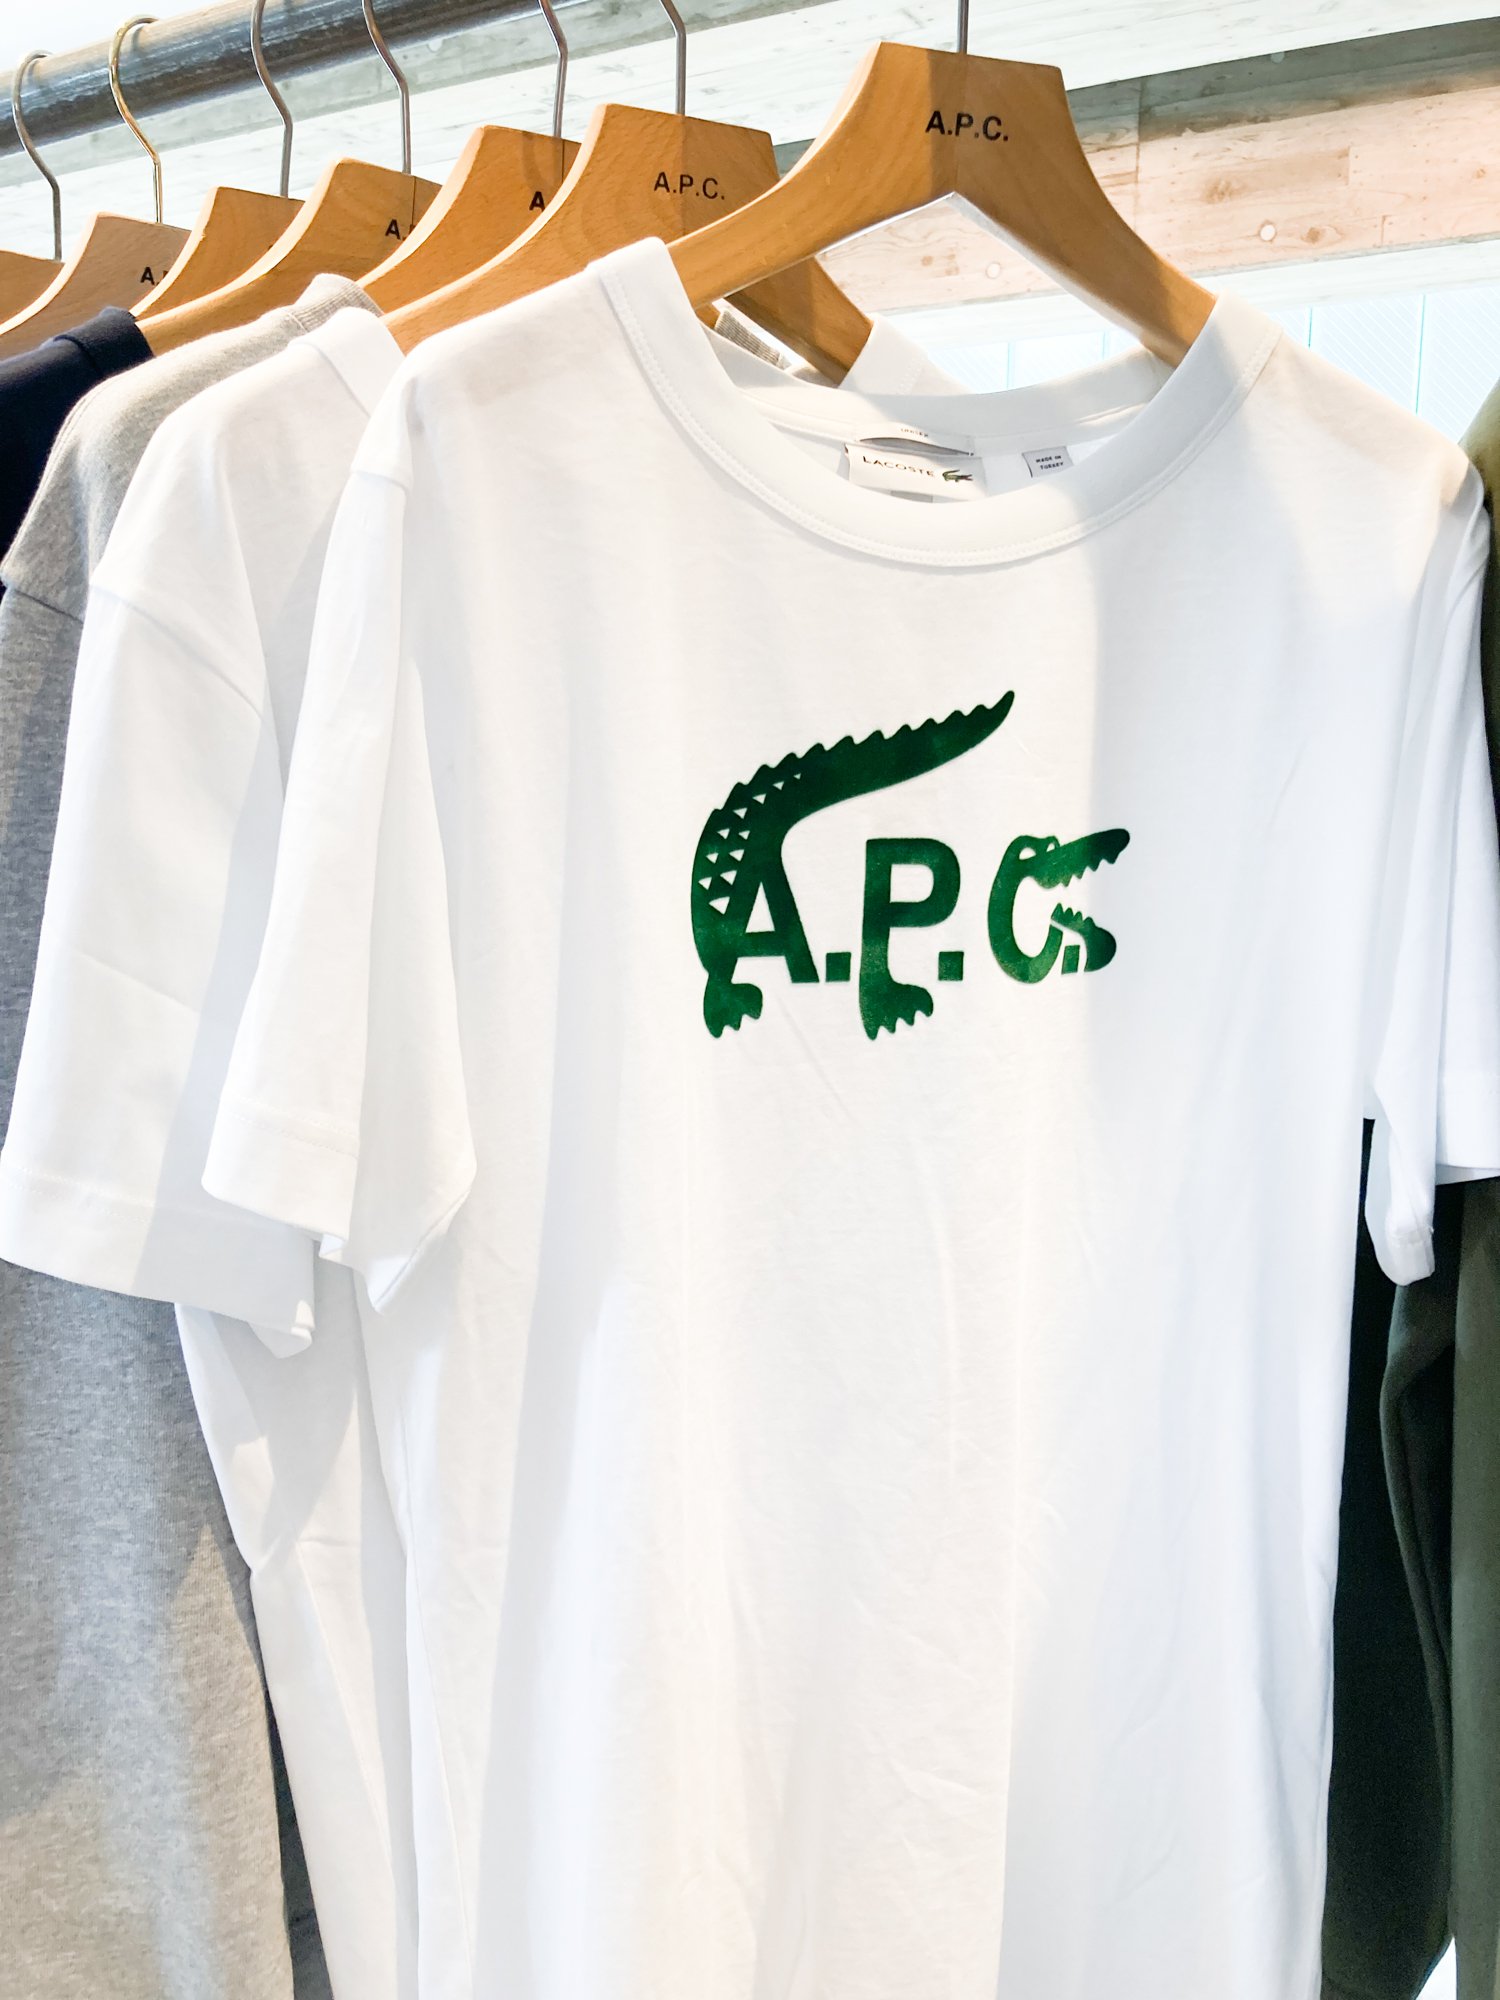 A.P.C.×LACOSTEの実物を見て思った、「これ楽しい！」｜Pen Online